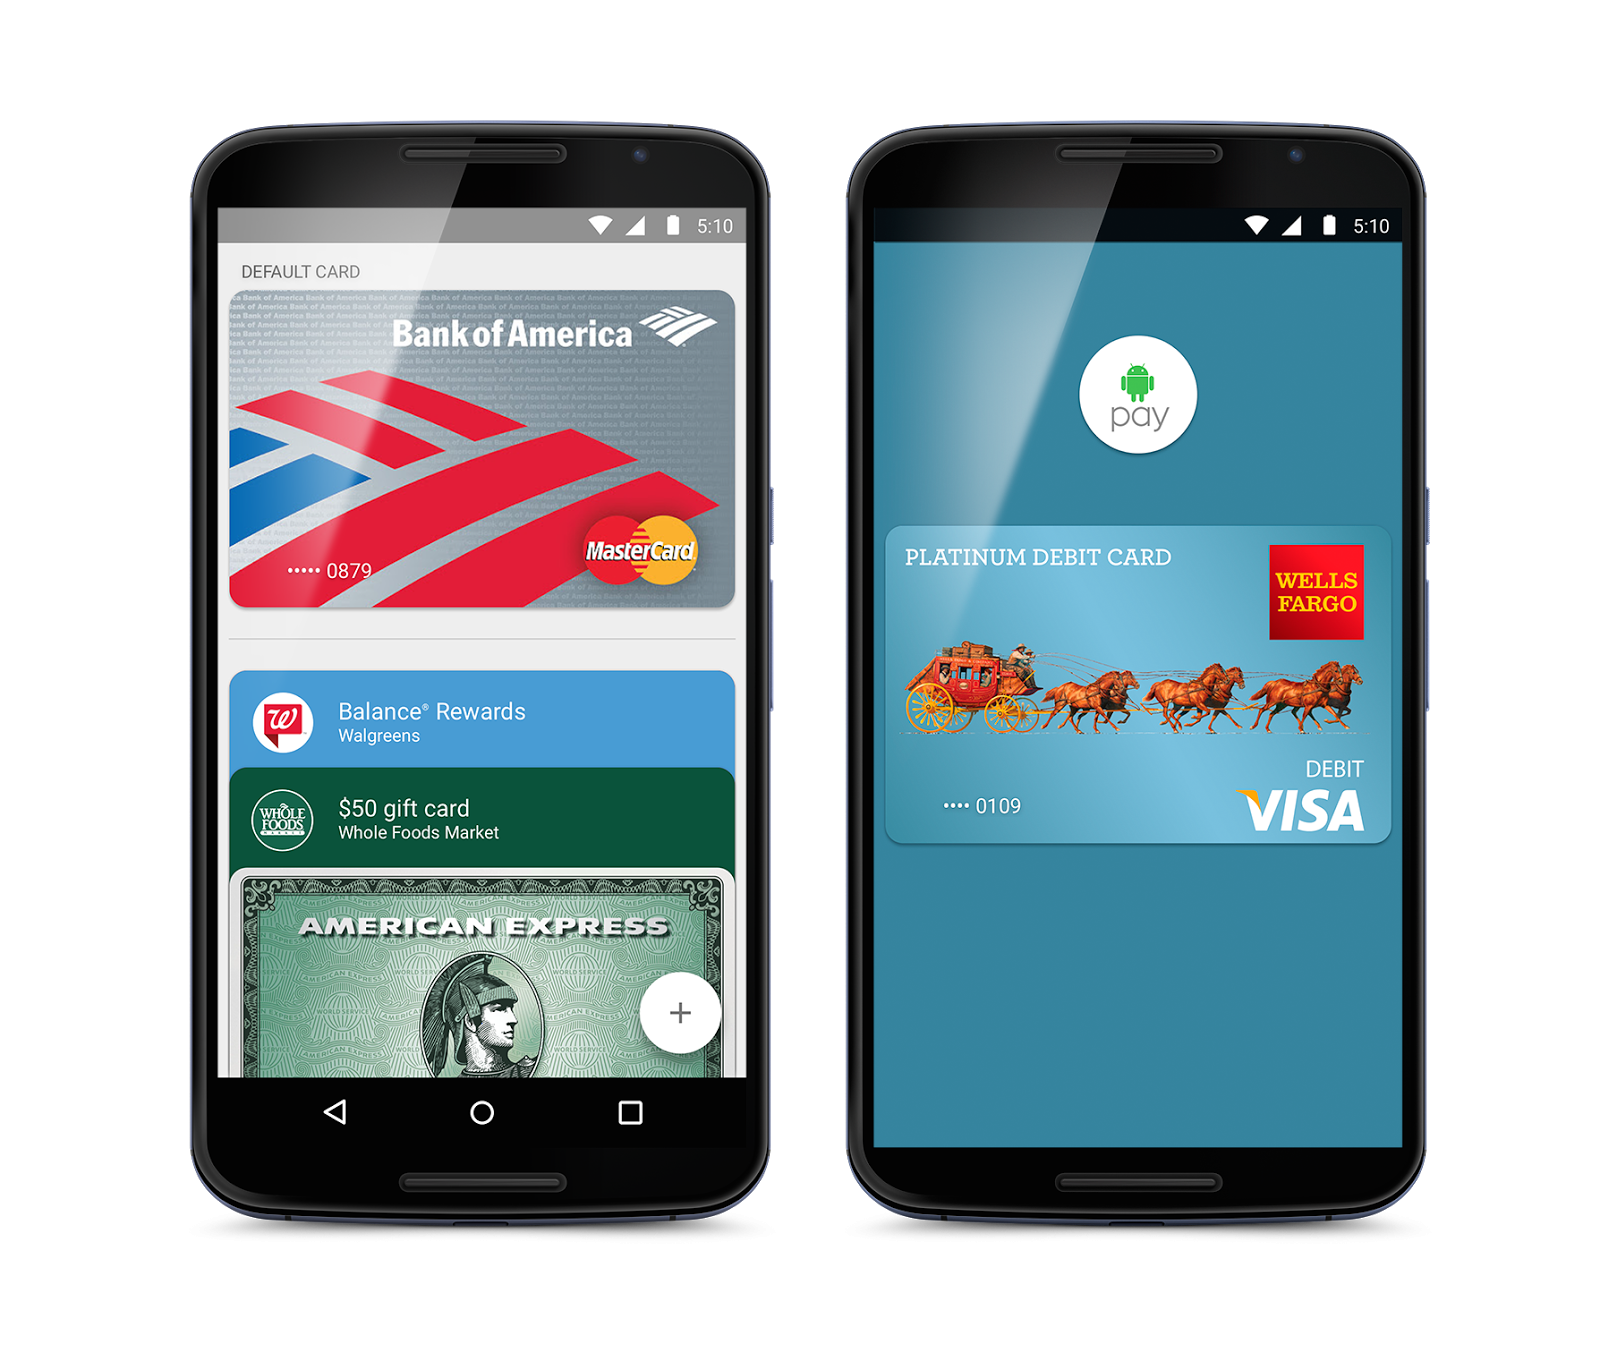 australia-welcomes-android-pay-despite-apple-pay-snub-2-image-cultofandroidcomwp-contentuploads201509Android-Pay-png